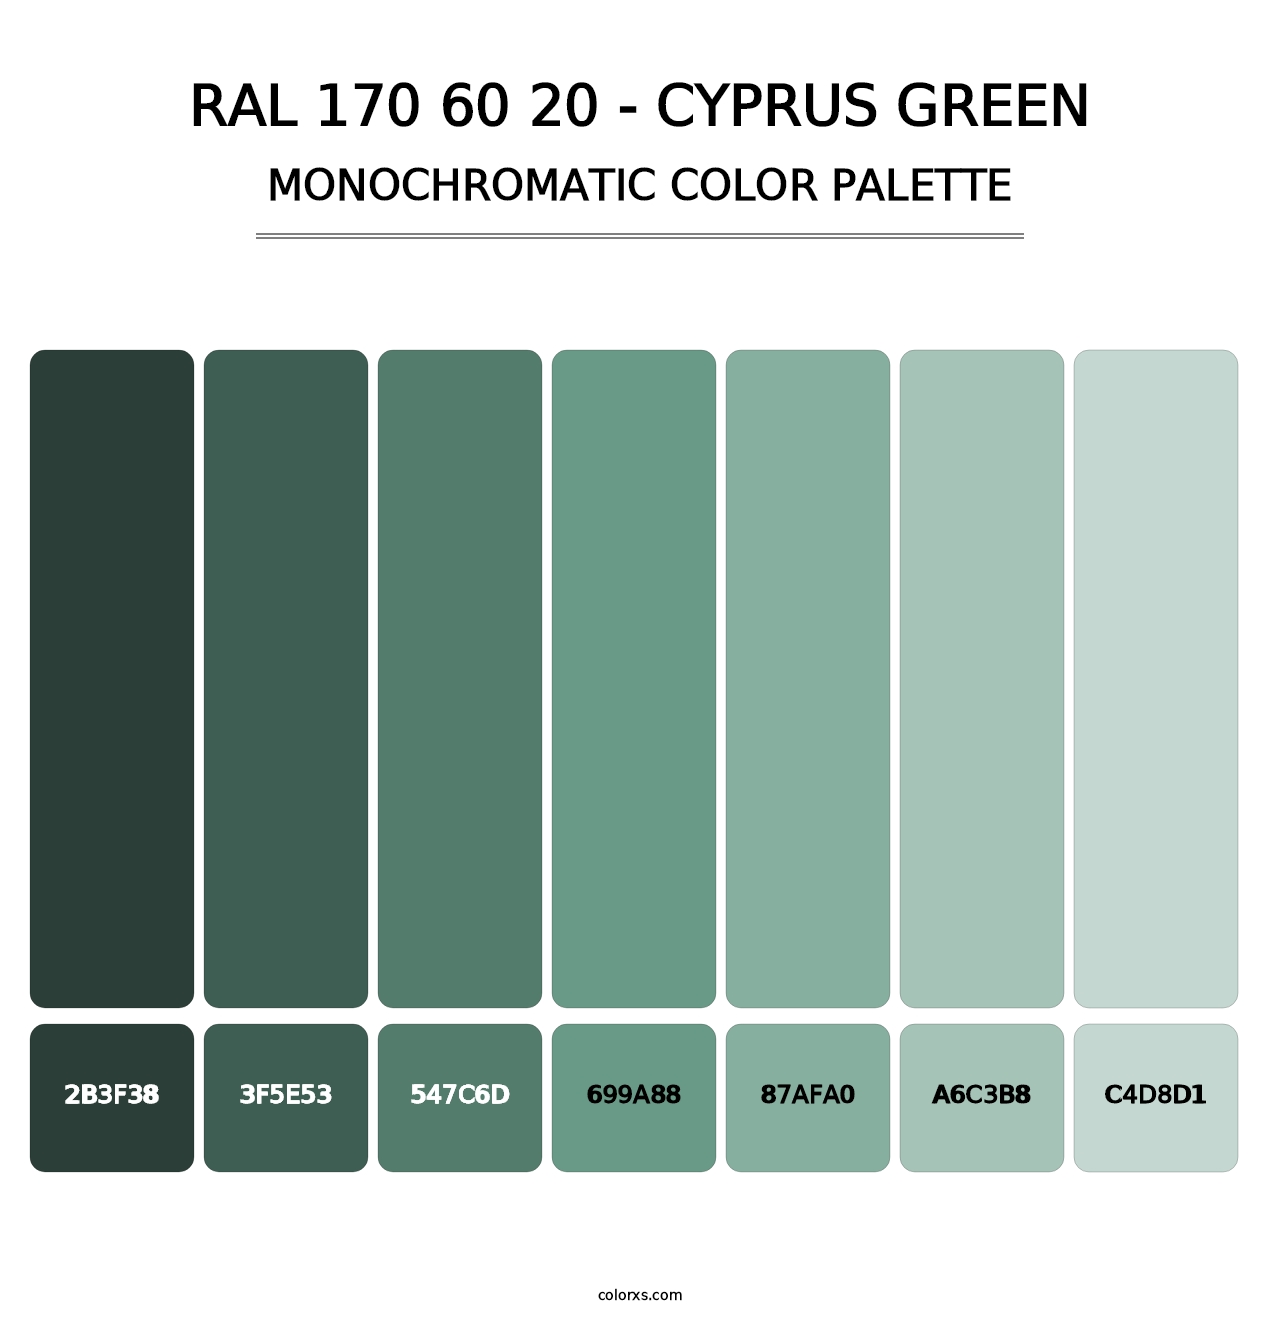 RAL 170 60 20 - Cyprus Green - Monochromatic Color Palette